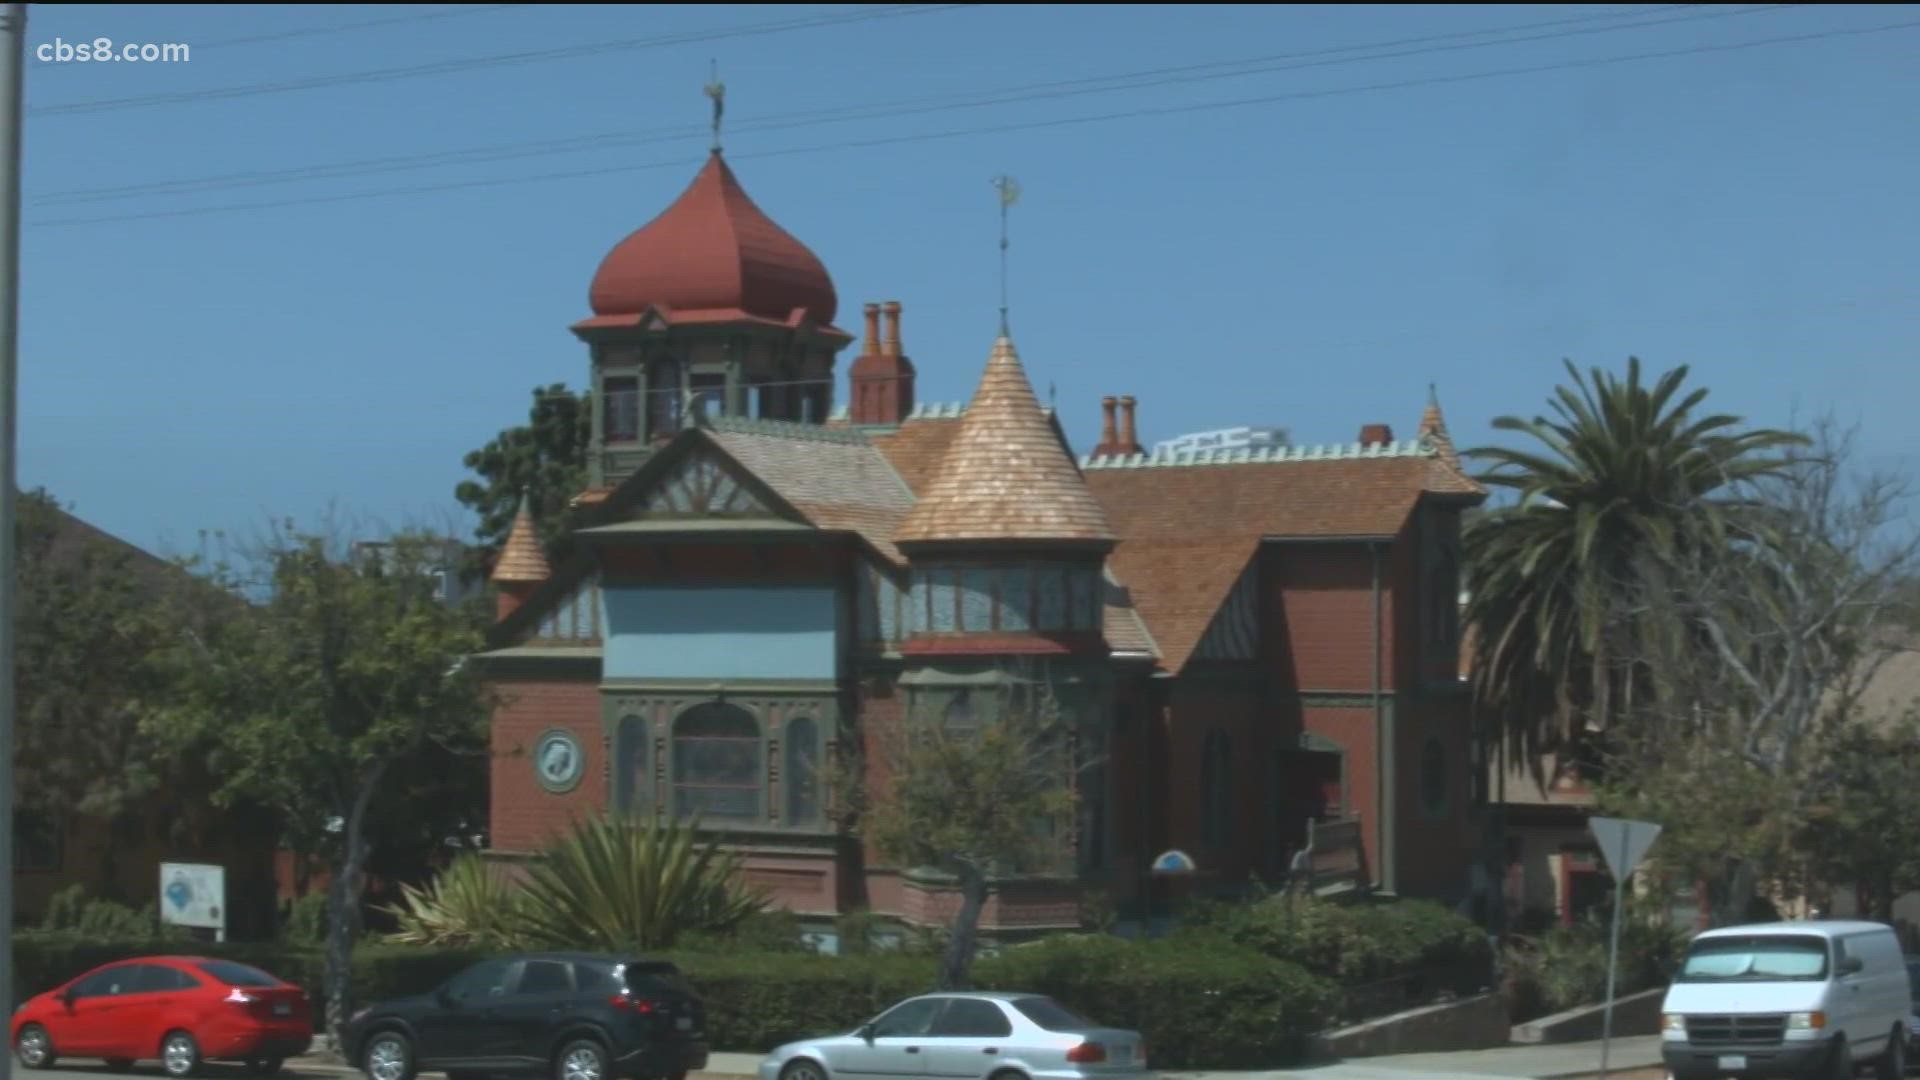 You can now tour a piece of San Diego's enchanted history. The recently renovated Villa Montezuma is open for tours in Sherman Heights villamontezumamuseum.org